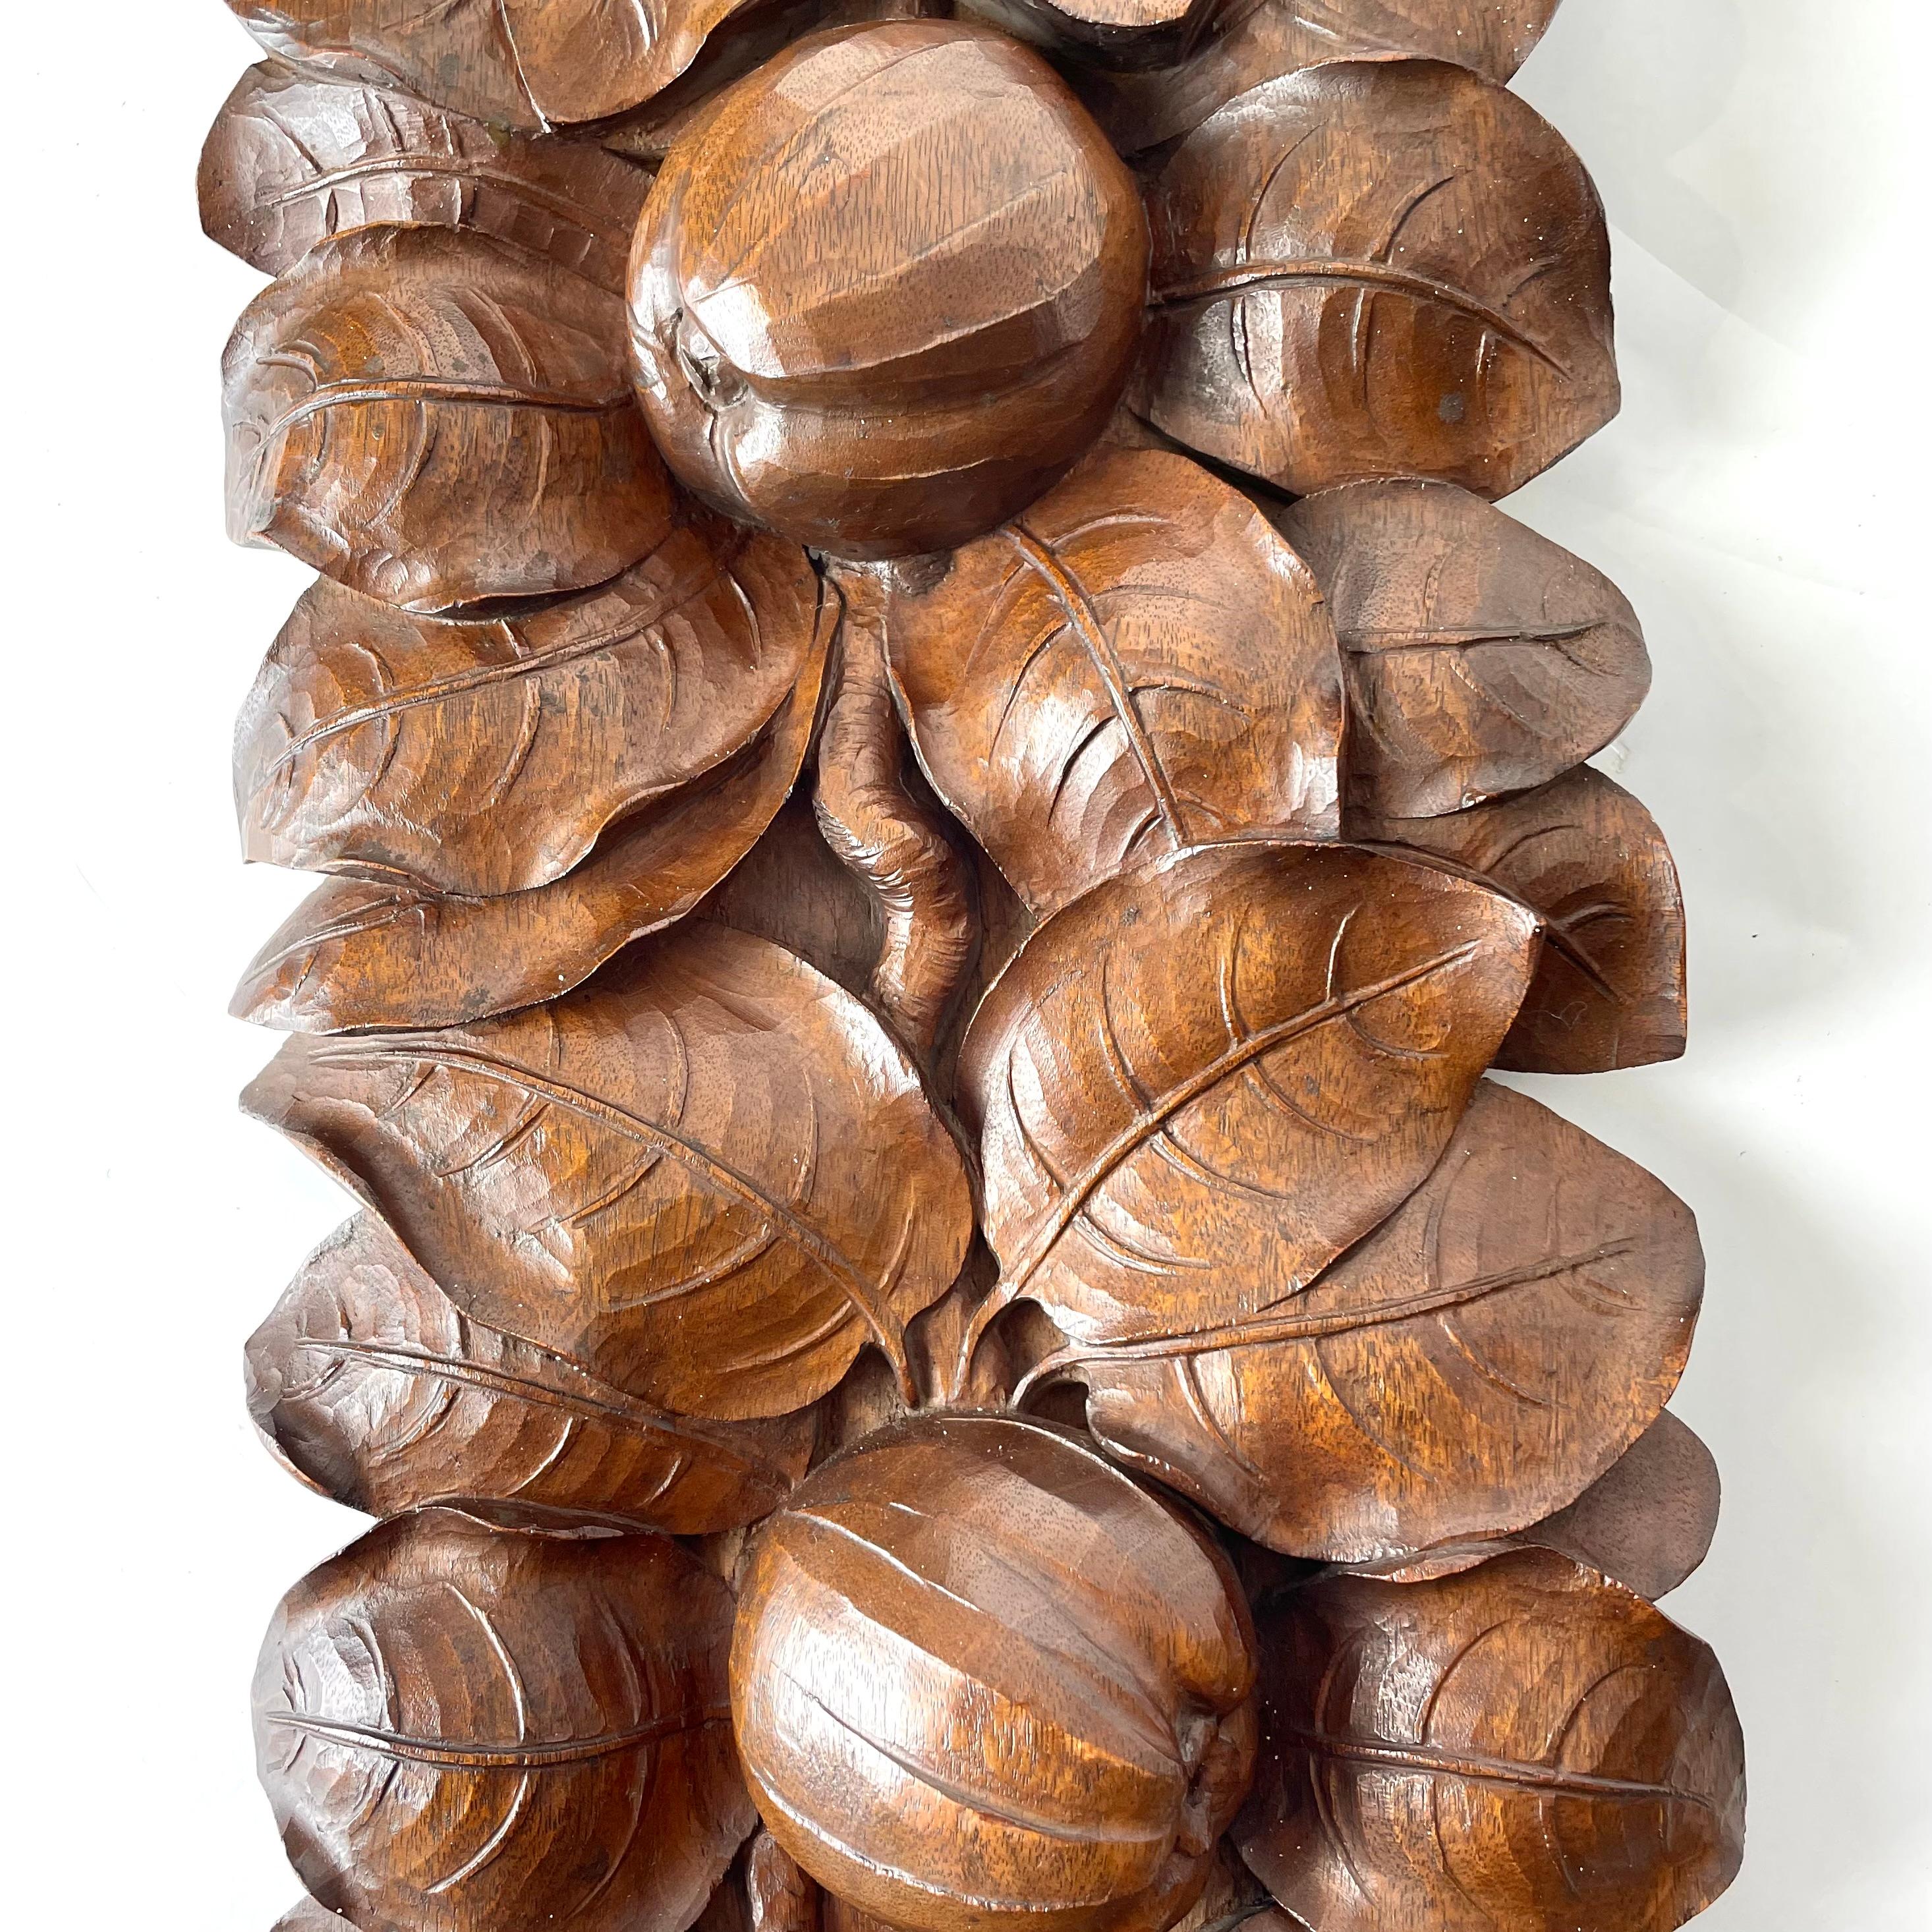 Walnut Woodcarved Decorative Element Depicting Apples Foliage Early 20th Century For Sale 4